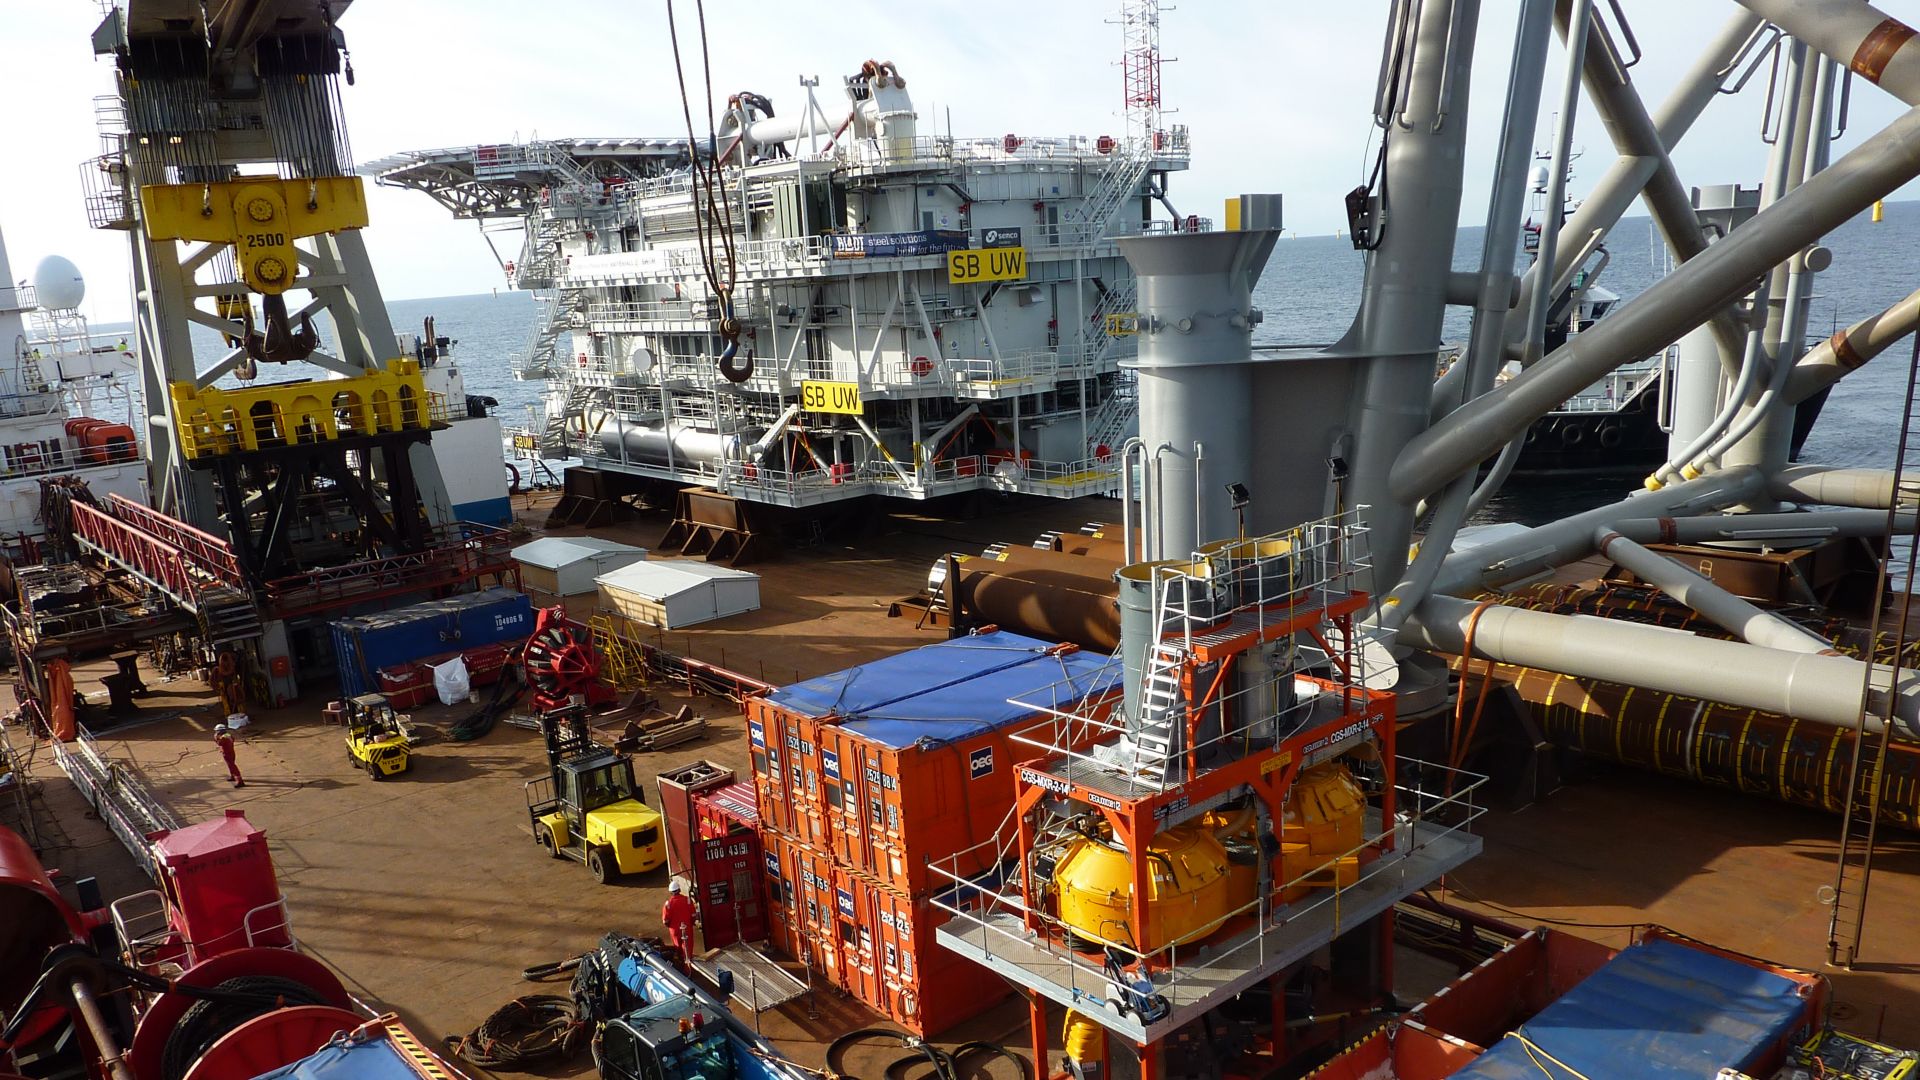 Grouting 4 legged offshore substation structure in the German sector of the North Sore